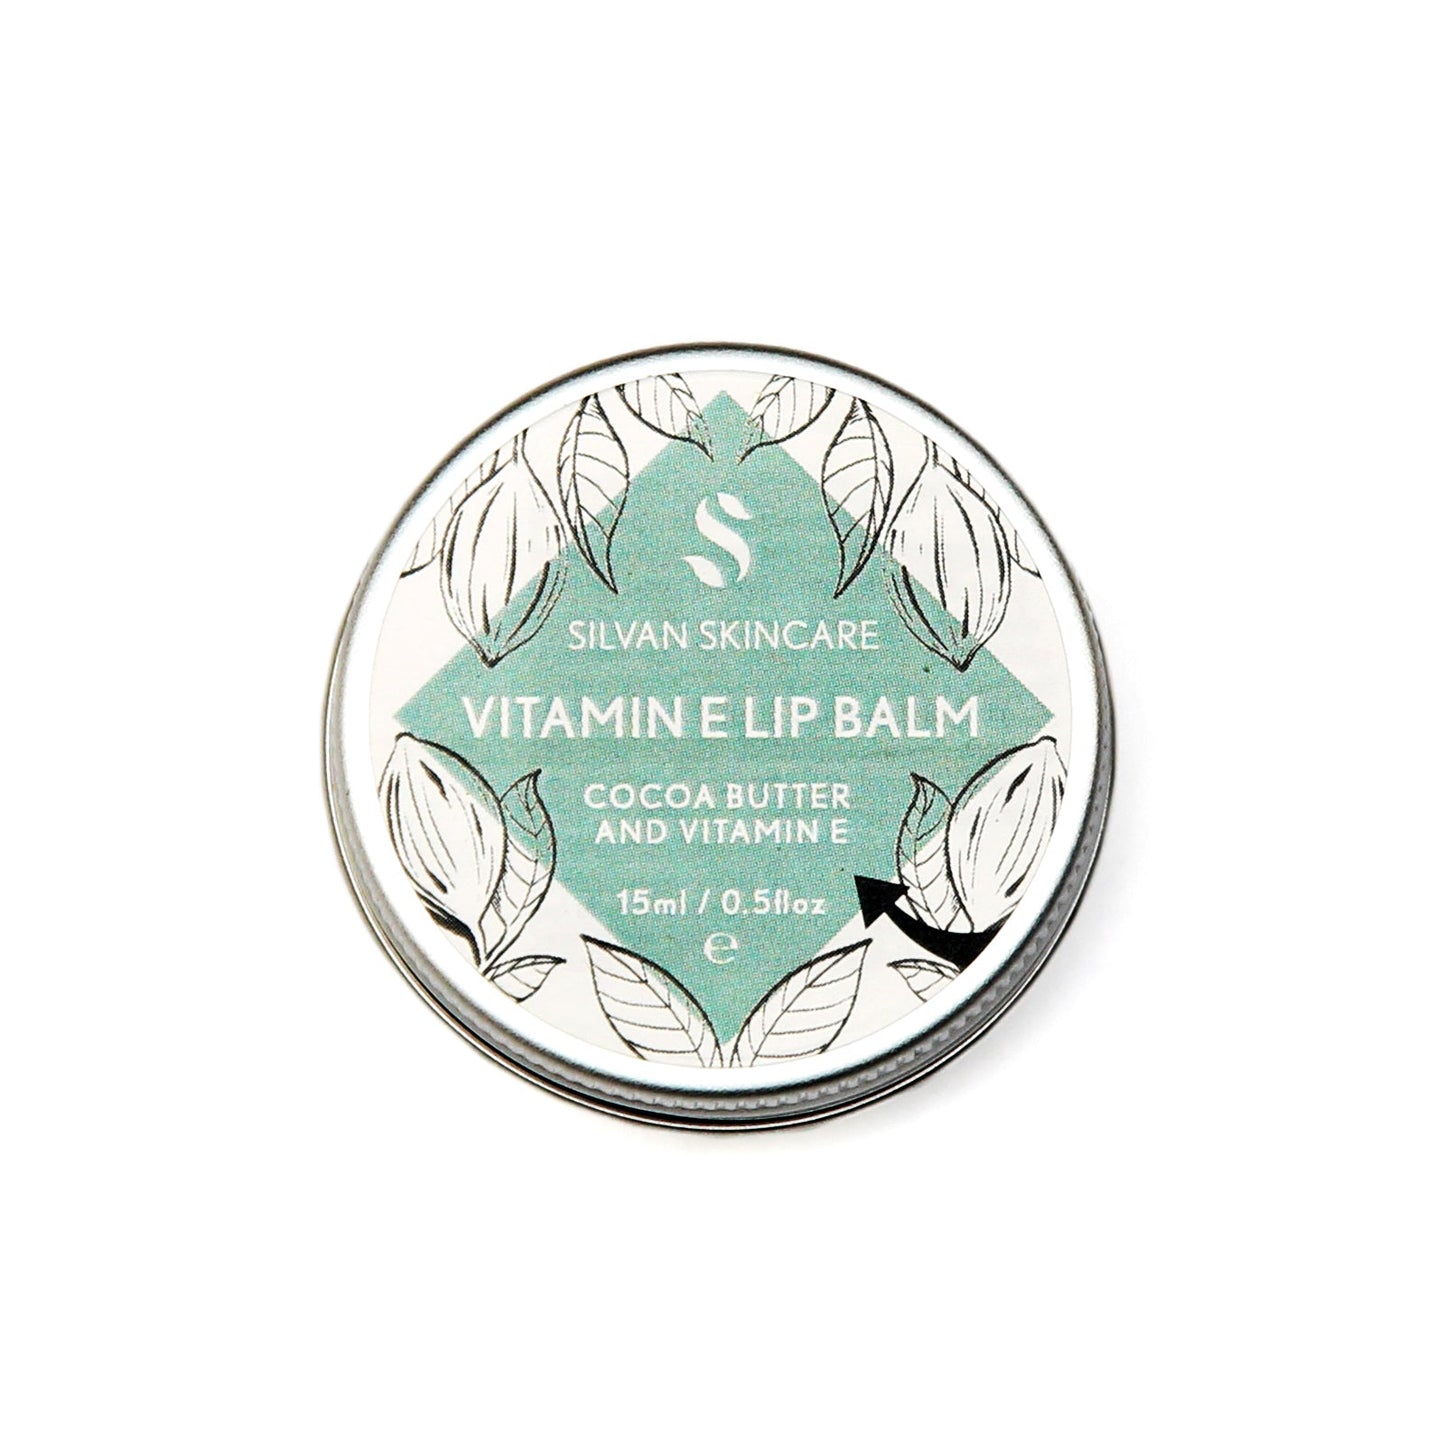 Single aluminium tin of the Silvan Skincare vitamin e lip balm. The label is round and white with a central diamond in blue and botanical illustrations around it.